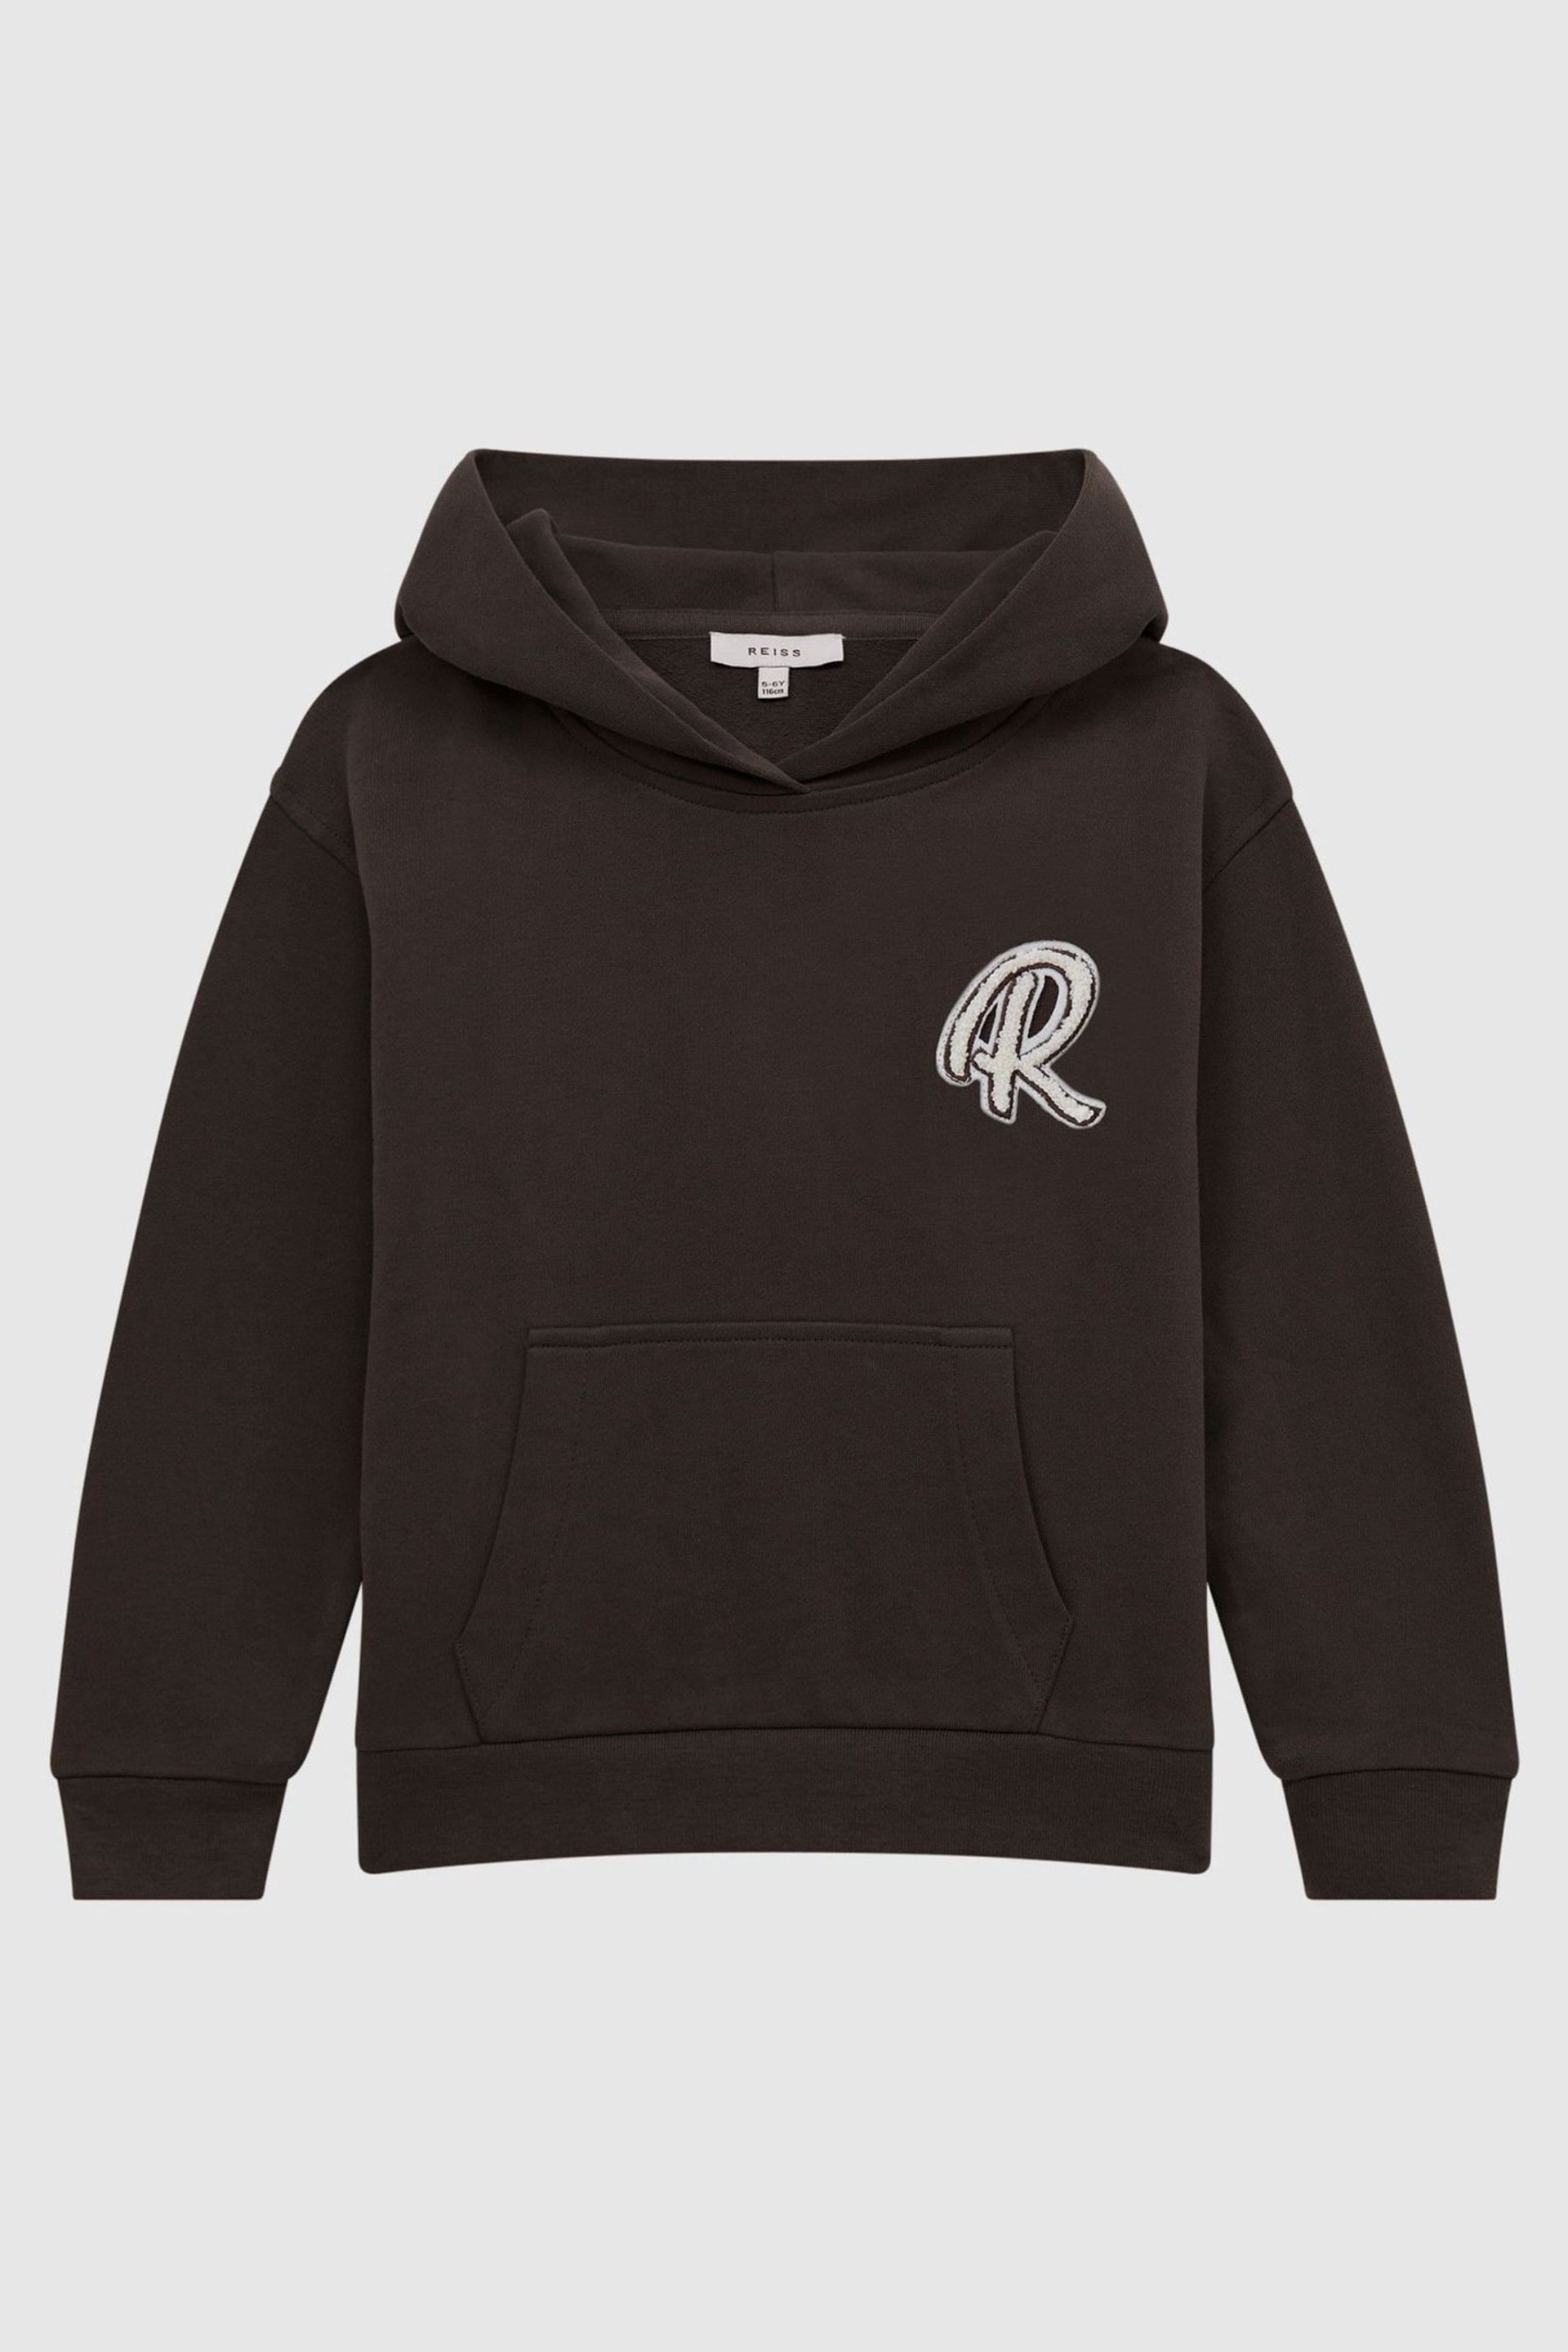 Reiss Chocolate Cade Junior Relaxed Garment Dyed Logo Hoodie - Image 2 of 6